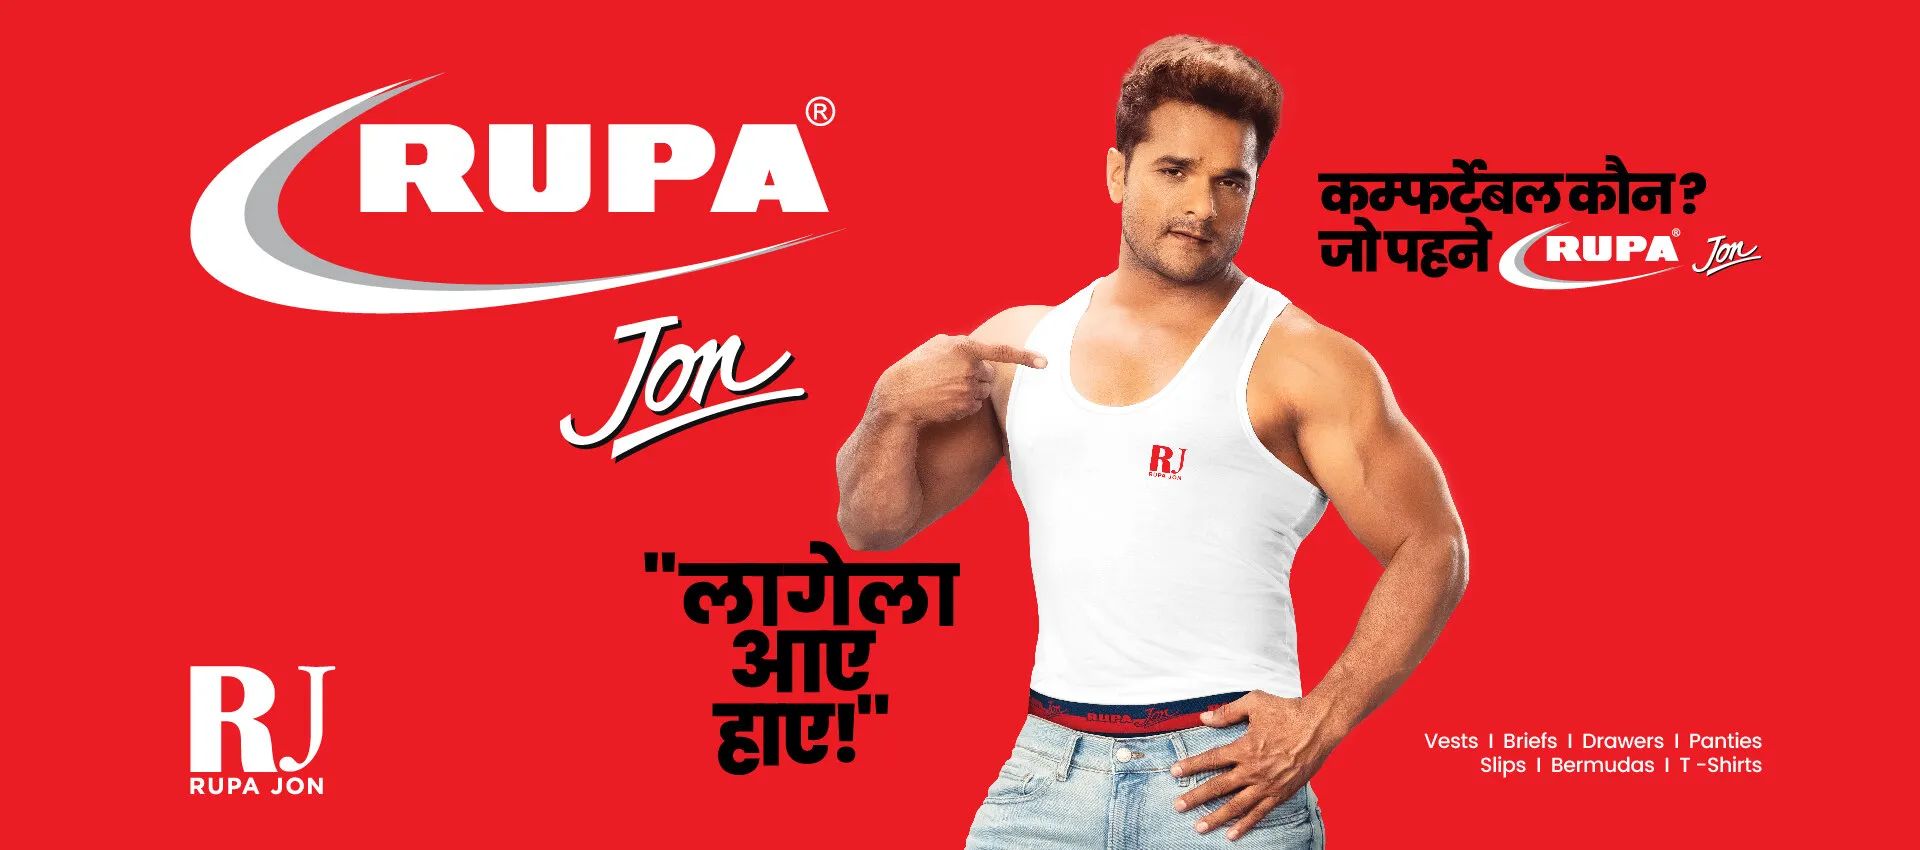 Rupa Innerwear Upto 80% Off From Rs. 90 [Limited Stock]